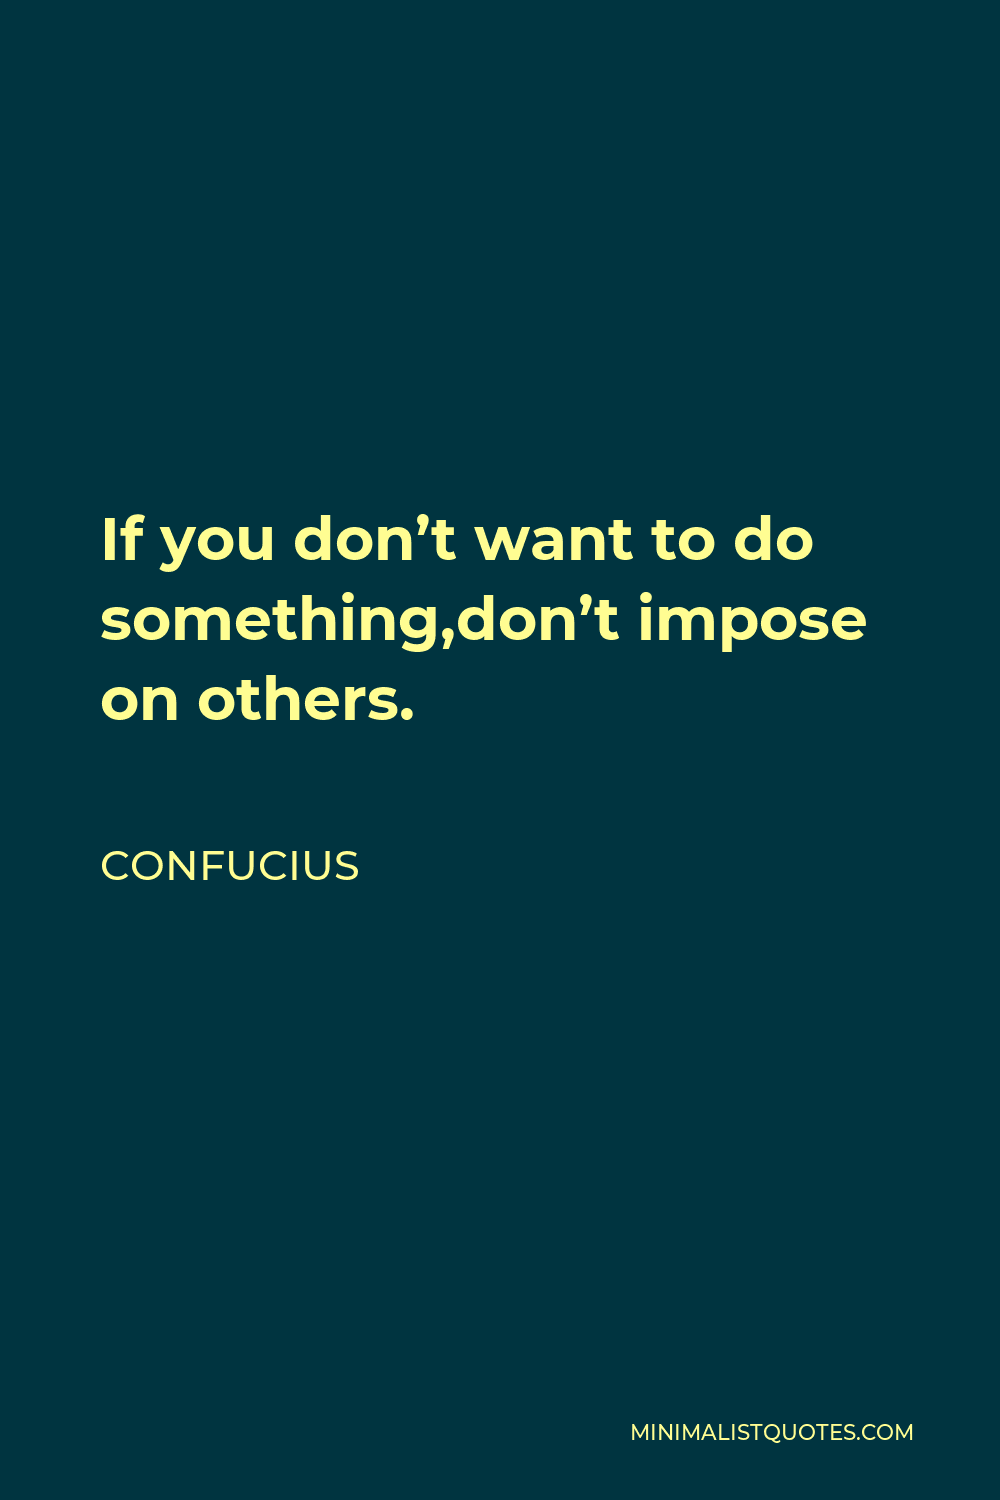 Confucius Quote - If you don’t want to do something,don’t impose on others.